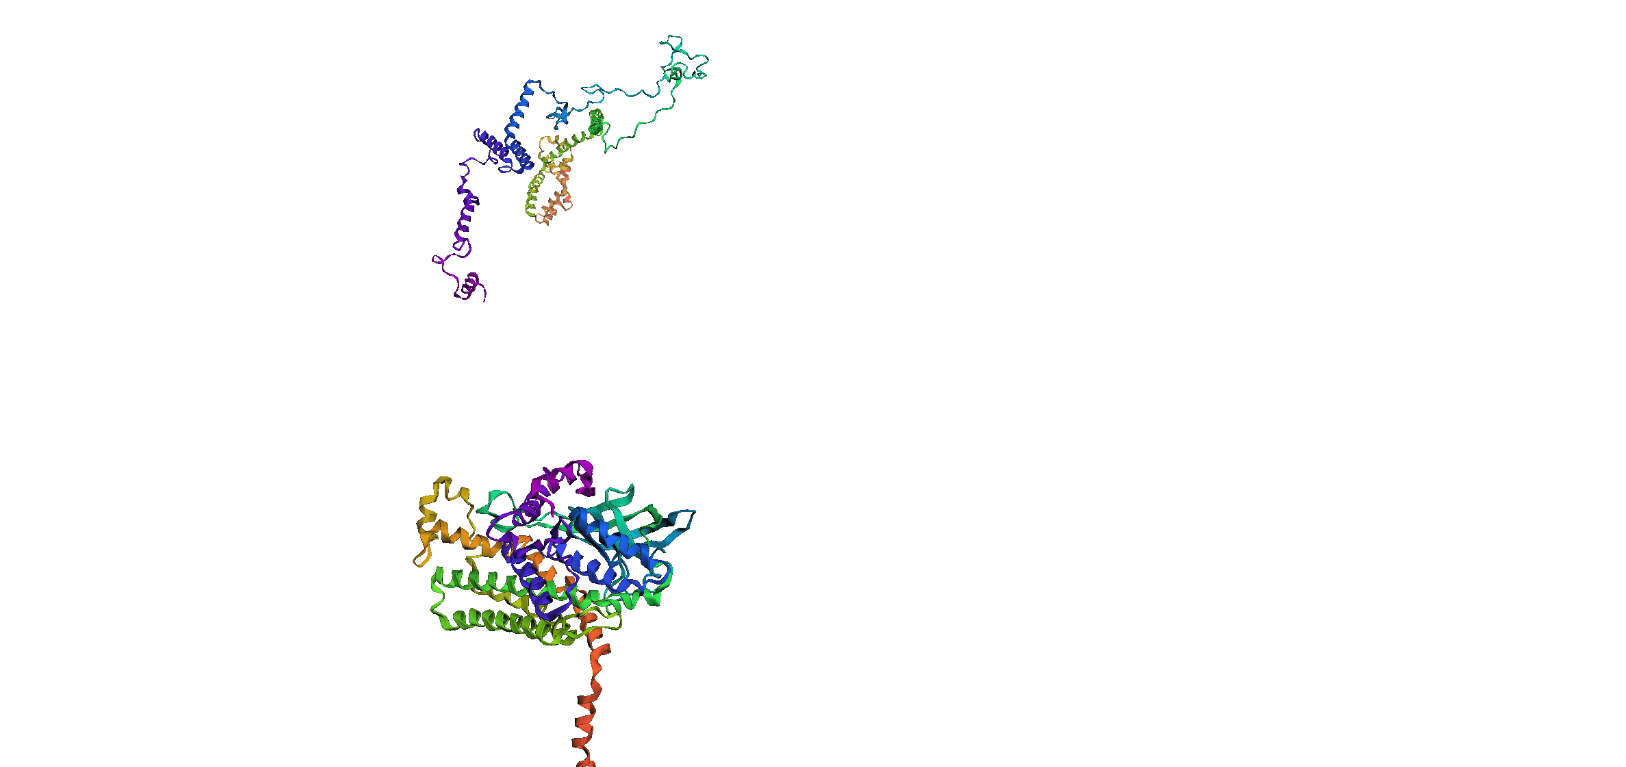 Protein Folding Using Machine Learning